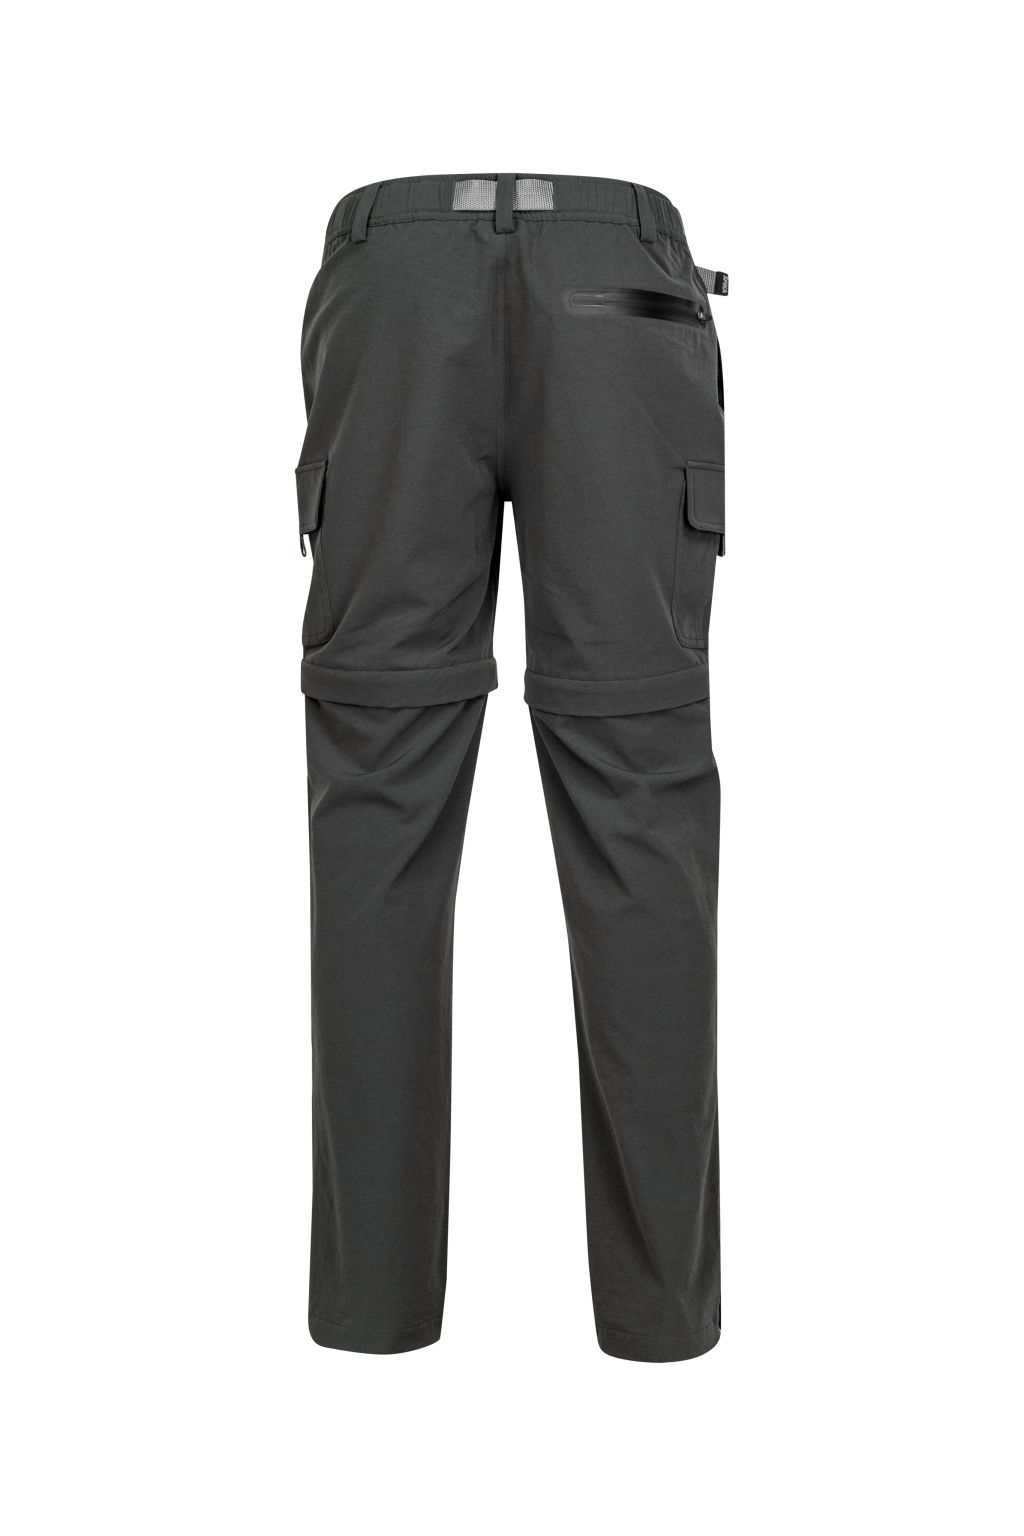 Spika GO Access Zip Off Pants - Ink -  - Mansfield Hunting & Fishing - Products to prepare for Corona Virus